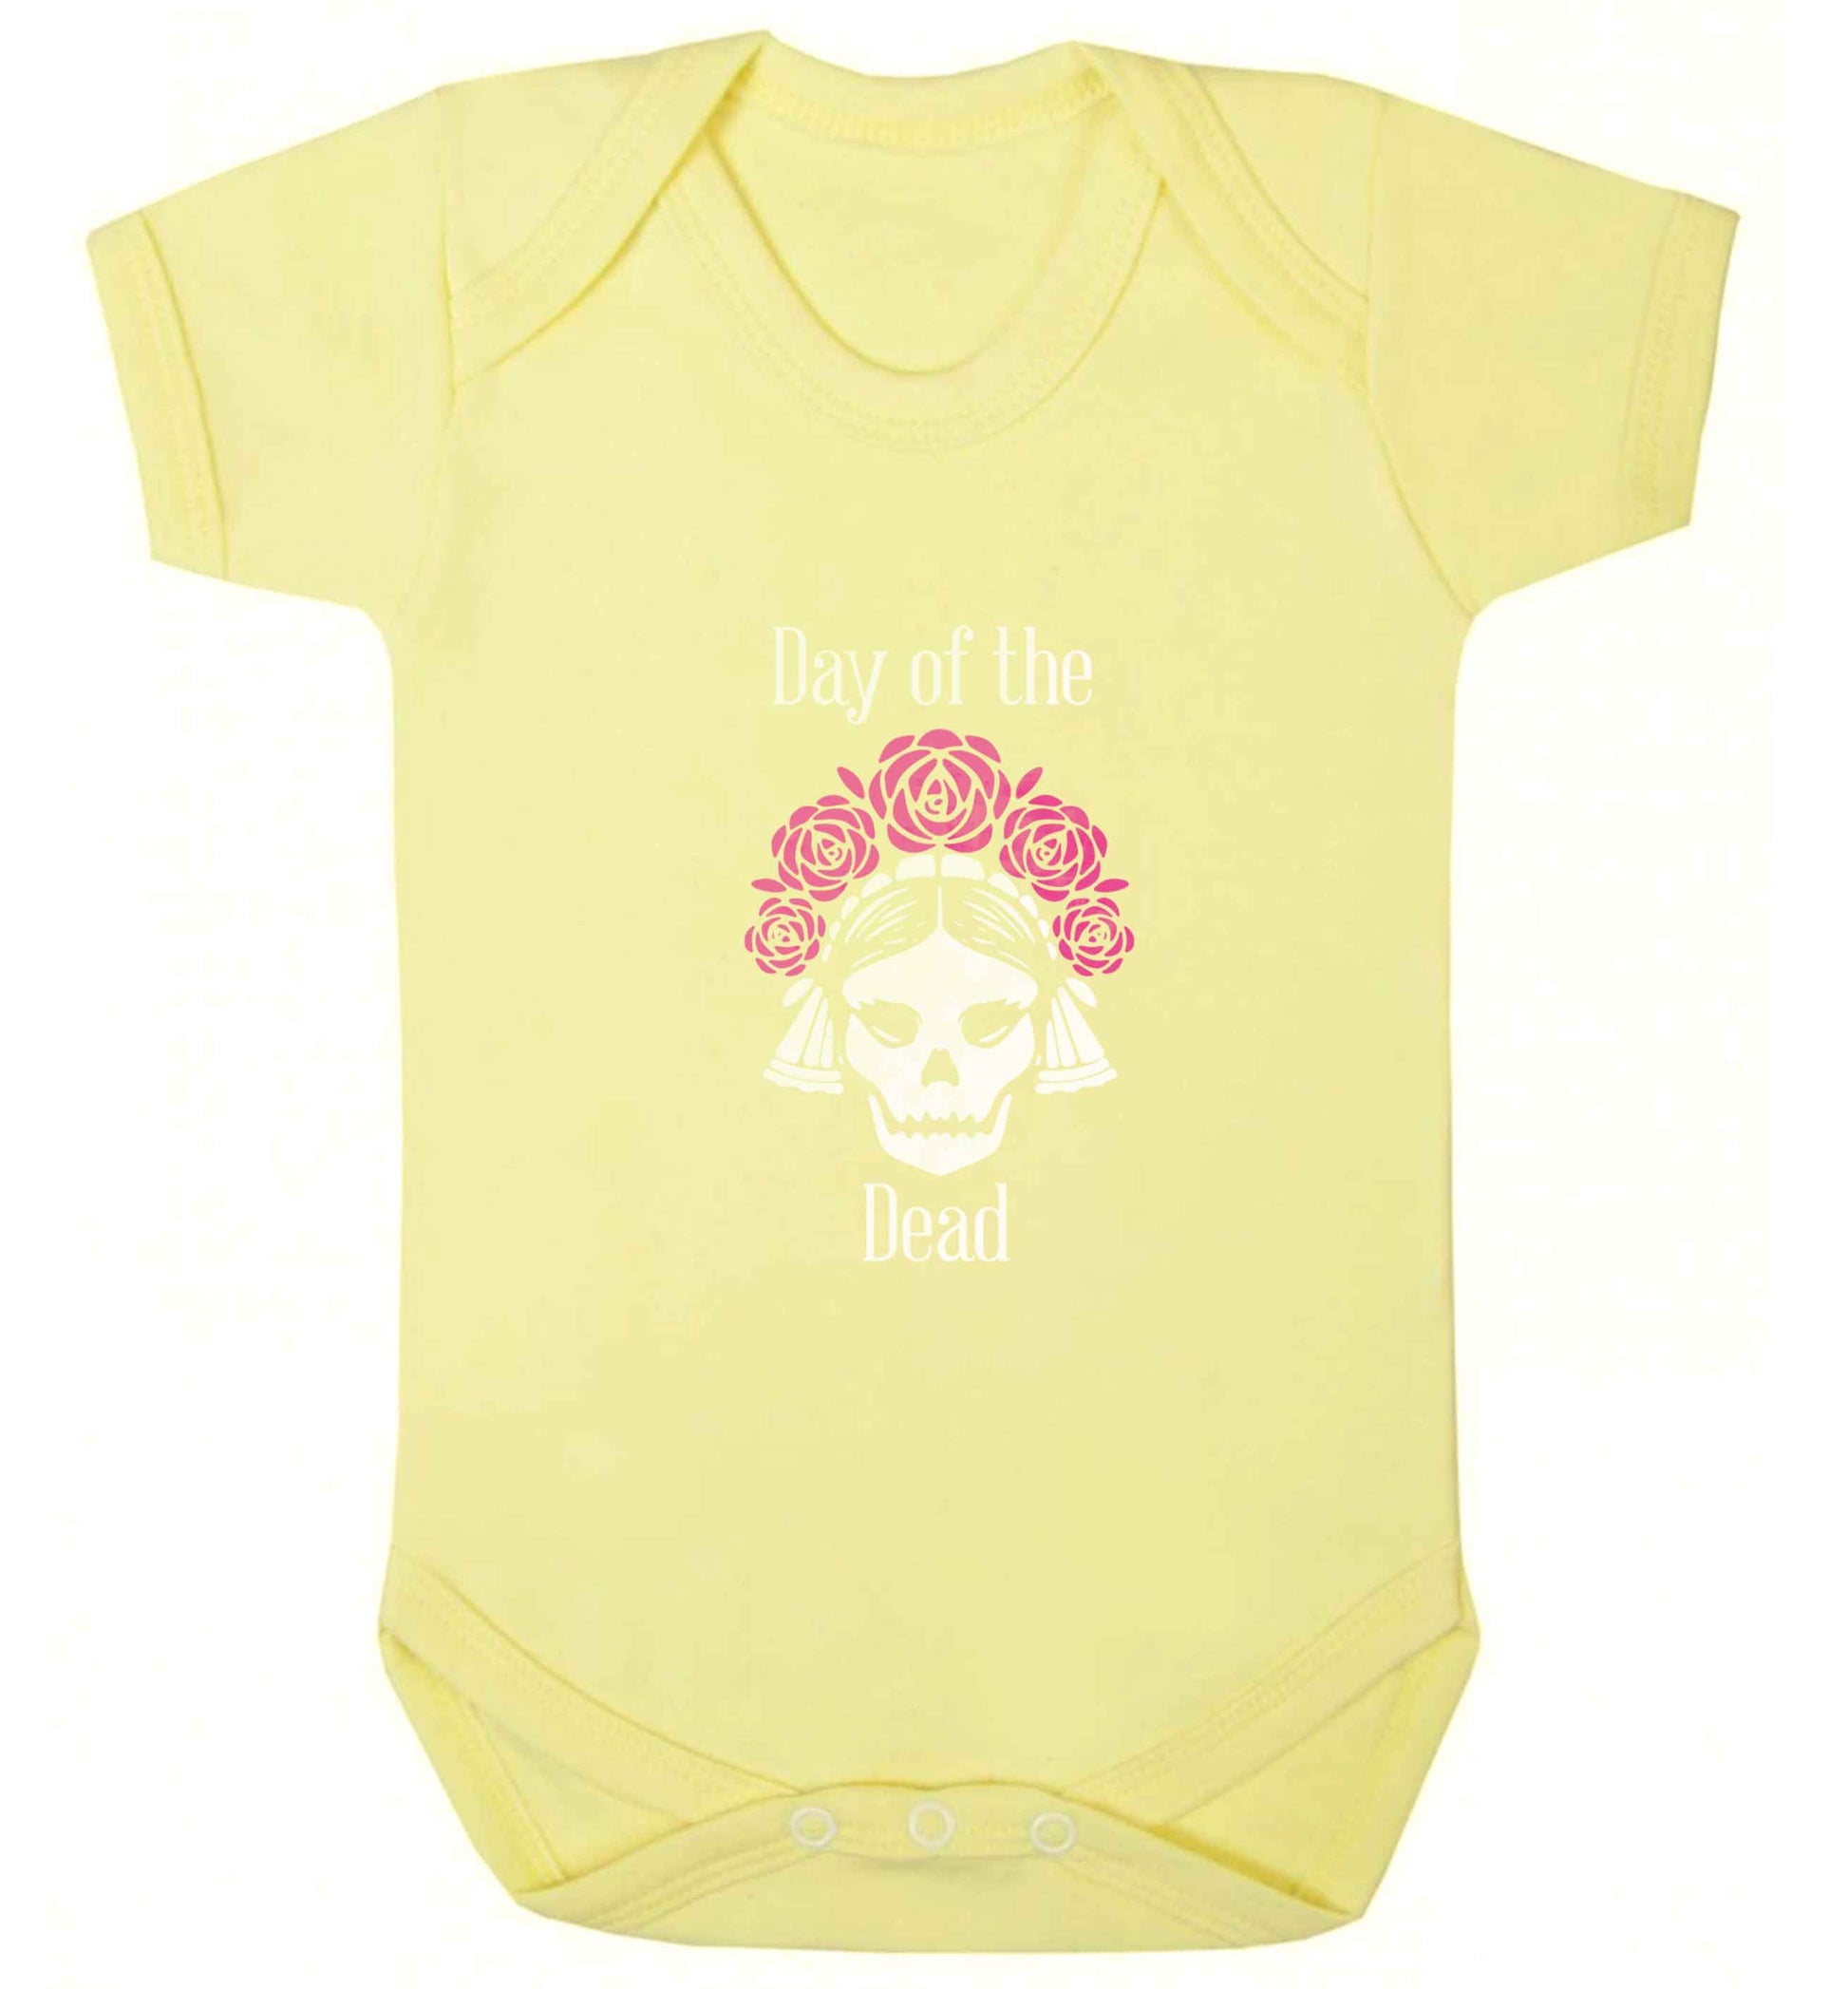 Day of the dead baby vest pale yellow 18-24 months